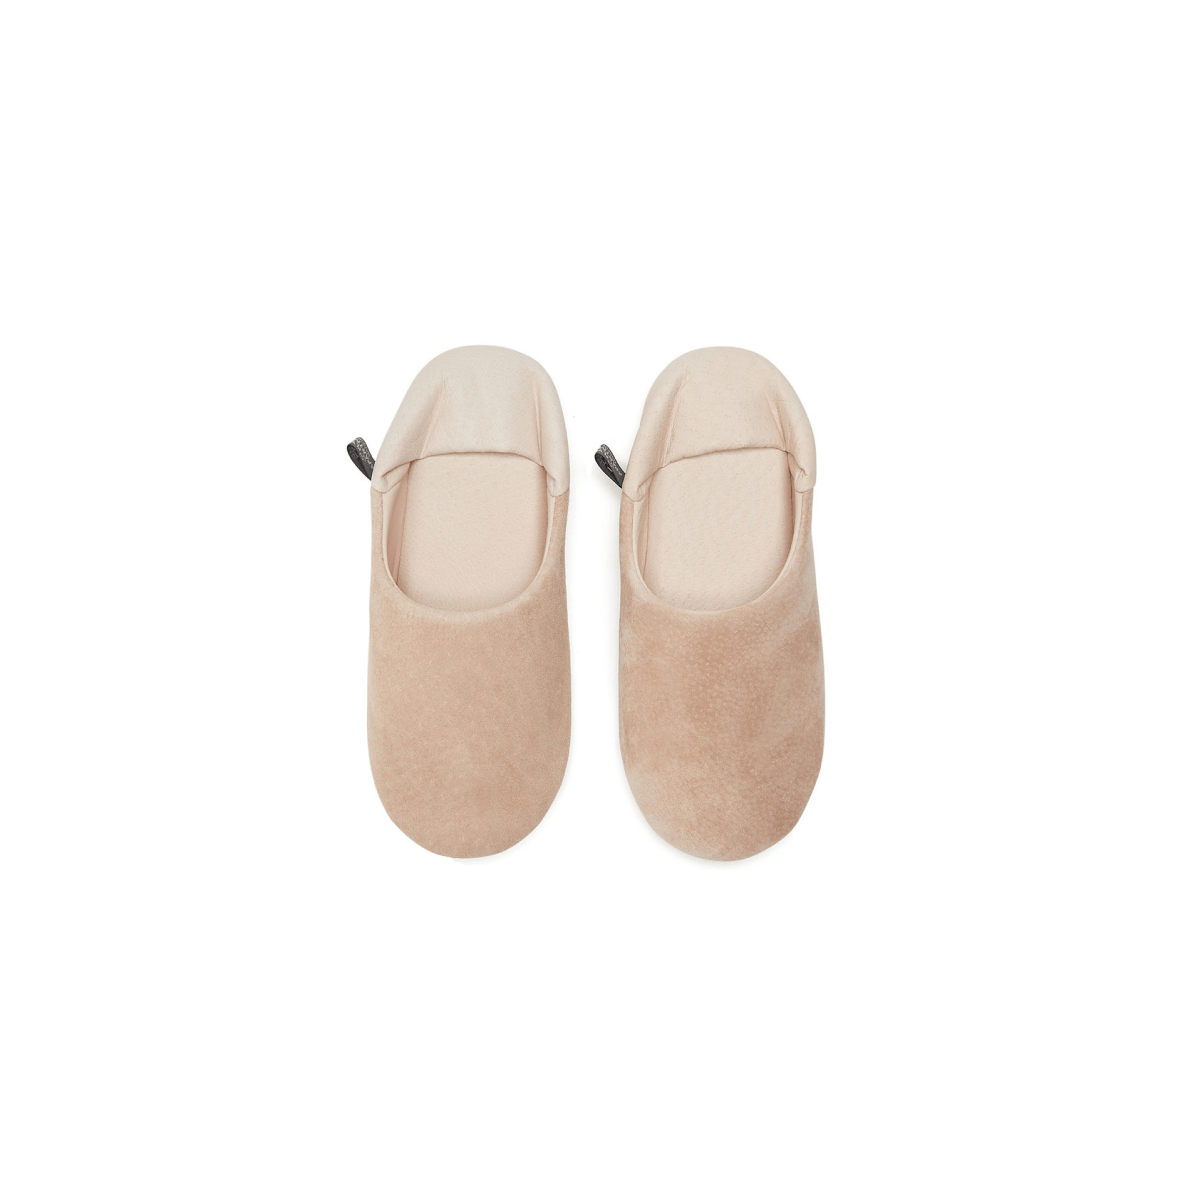 Morihata WASHABLE LEATHER ROOM SHOES SLIPPERS